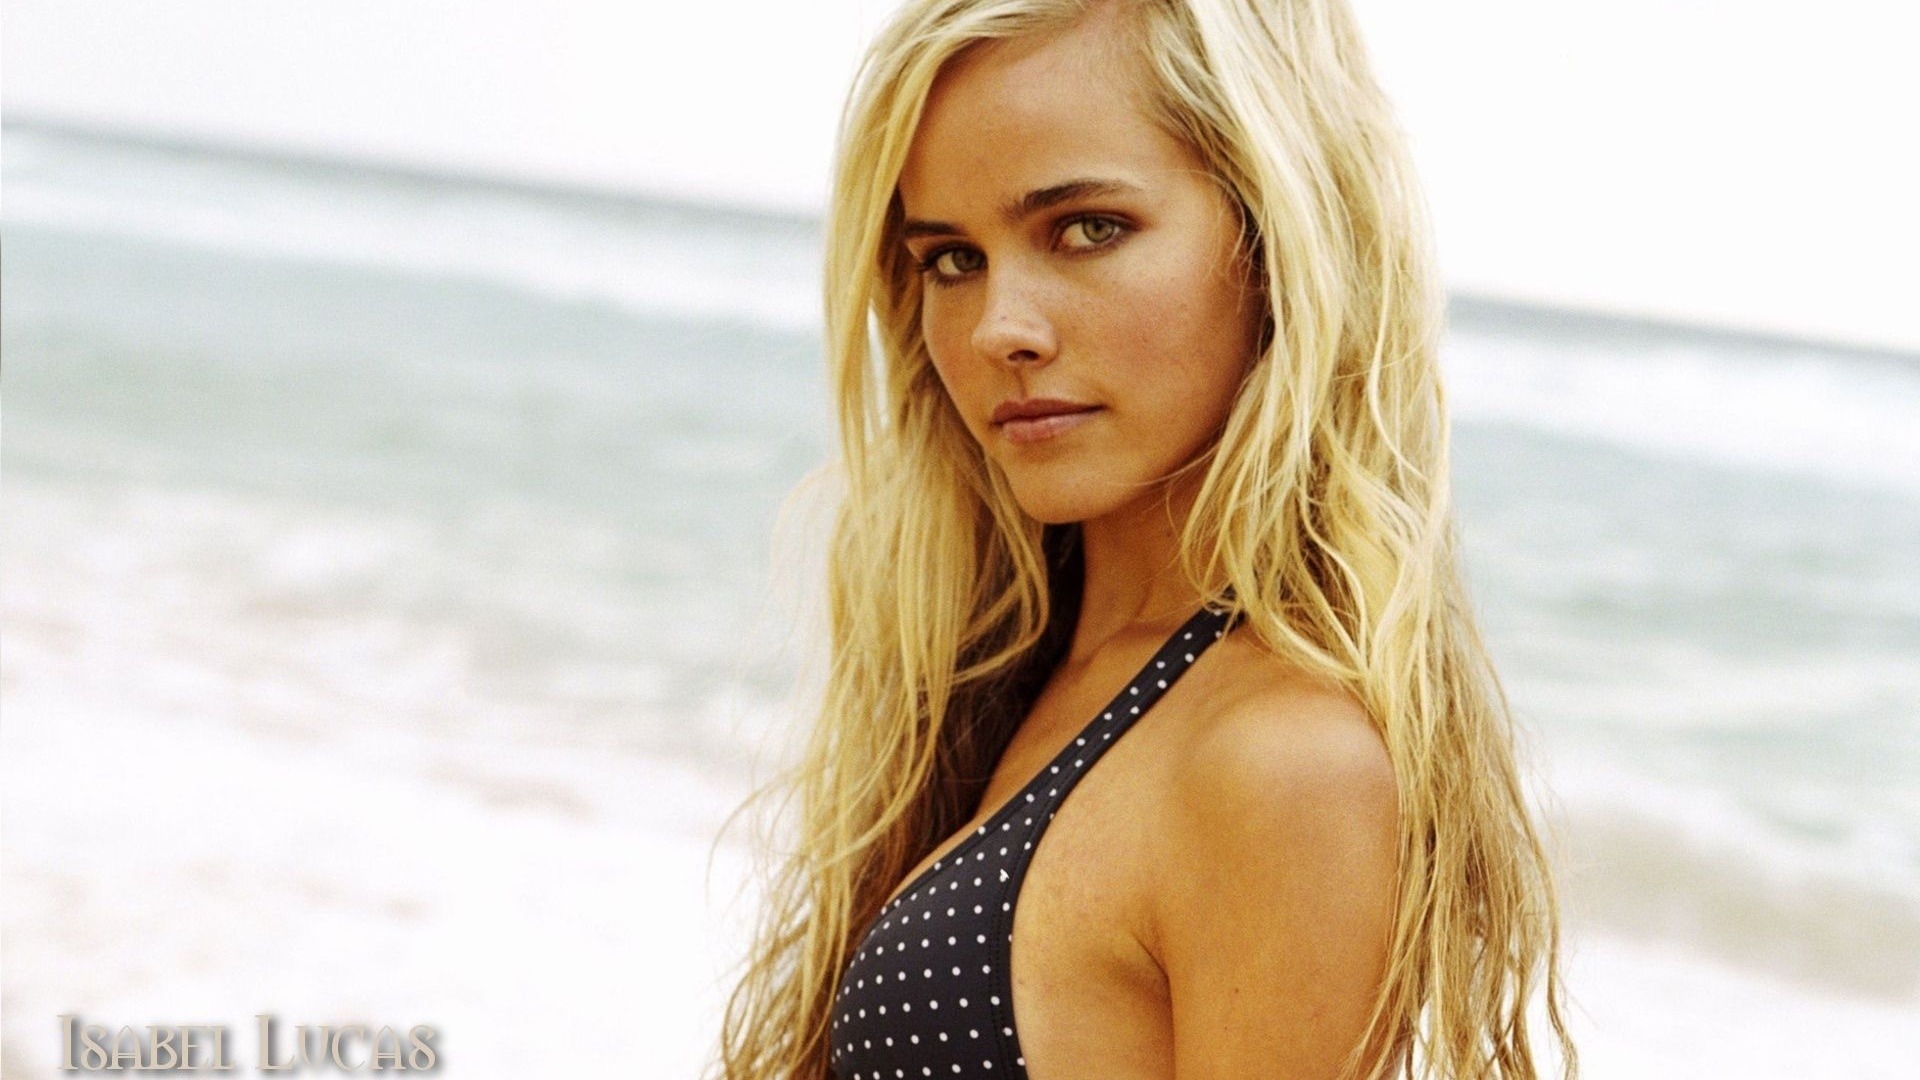 Isabel Lucas #001 - 1920x1080 Wallpapers Pictures Photos Images